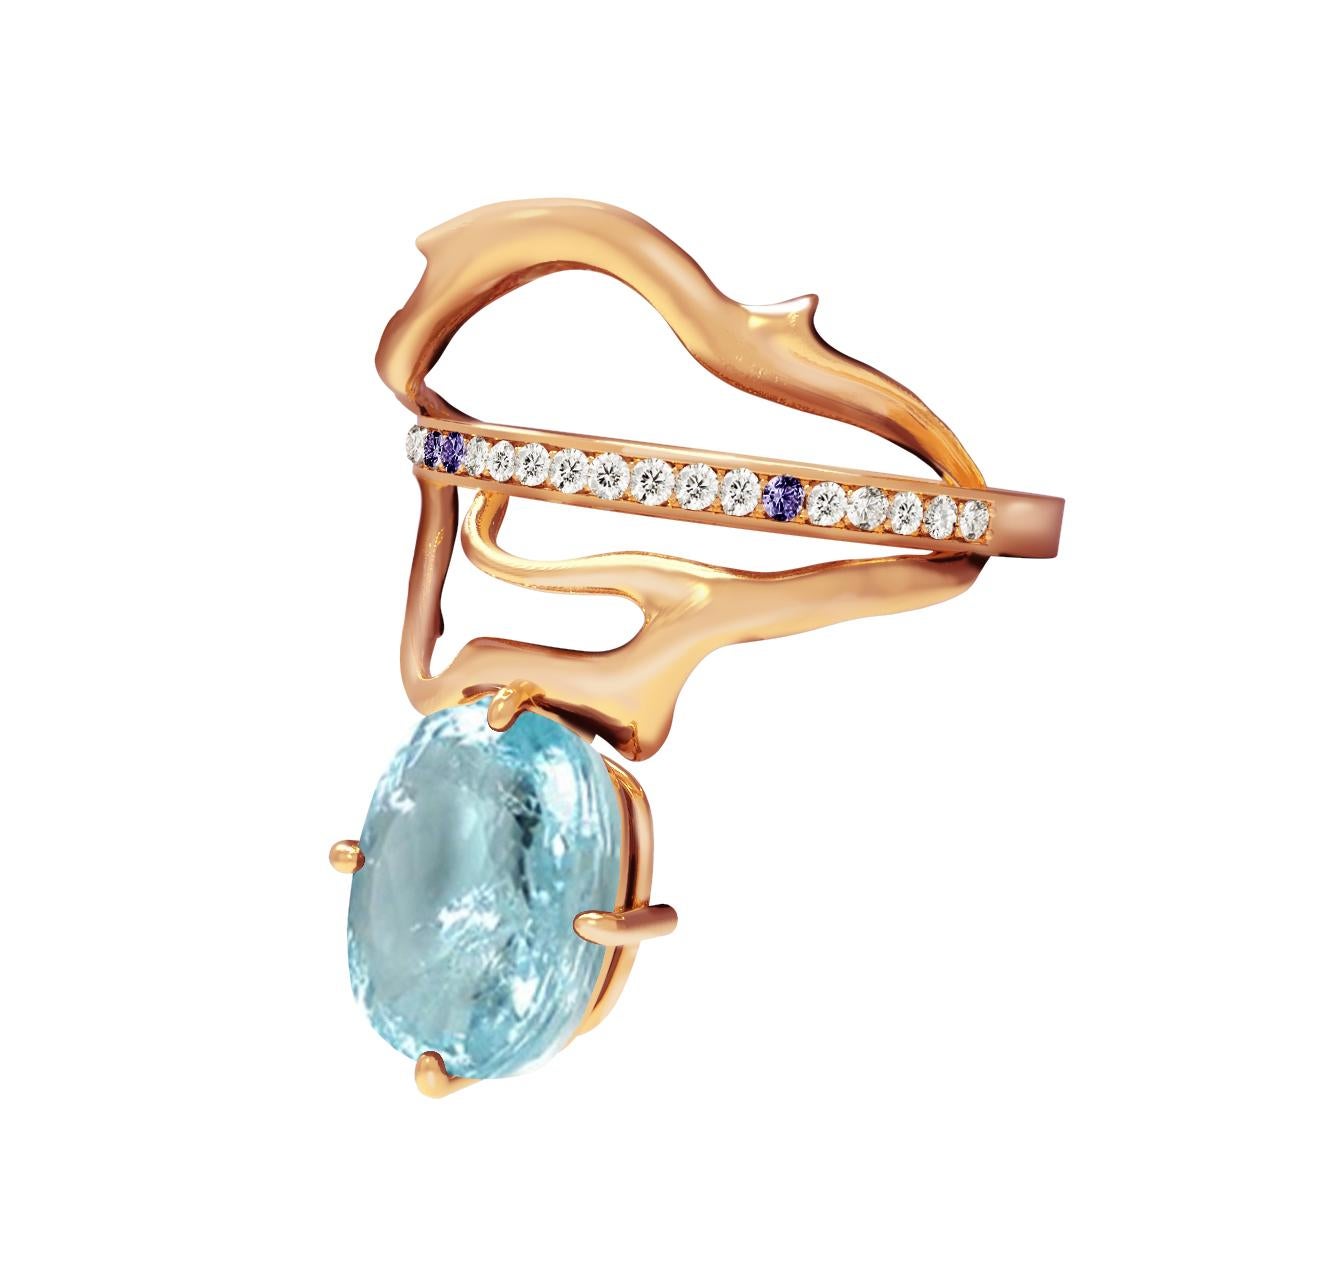 Oval Cut 18 Karat Yellow or Rose Gold Fashion Ring with Paraiba Tourmaline and Diamonds For Sale